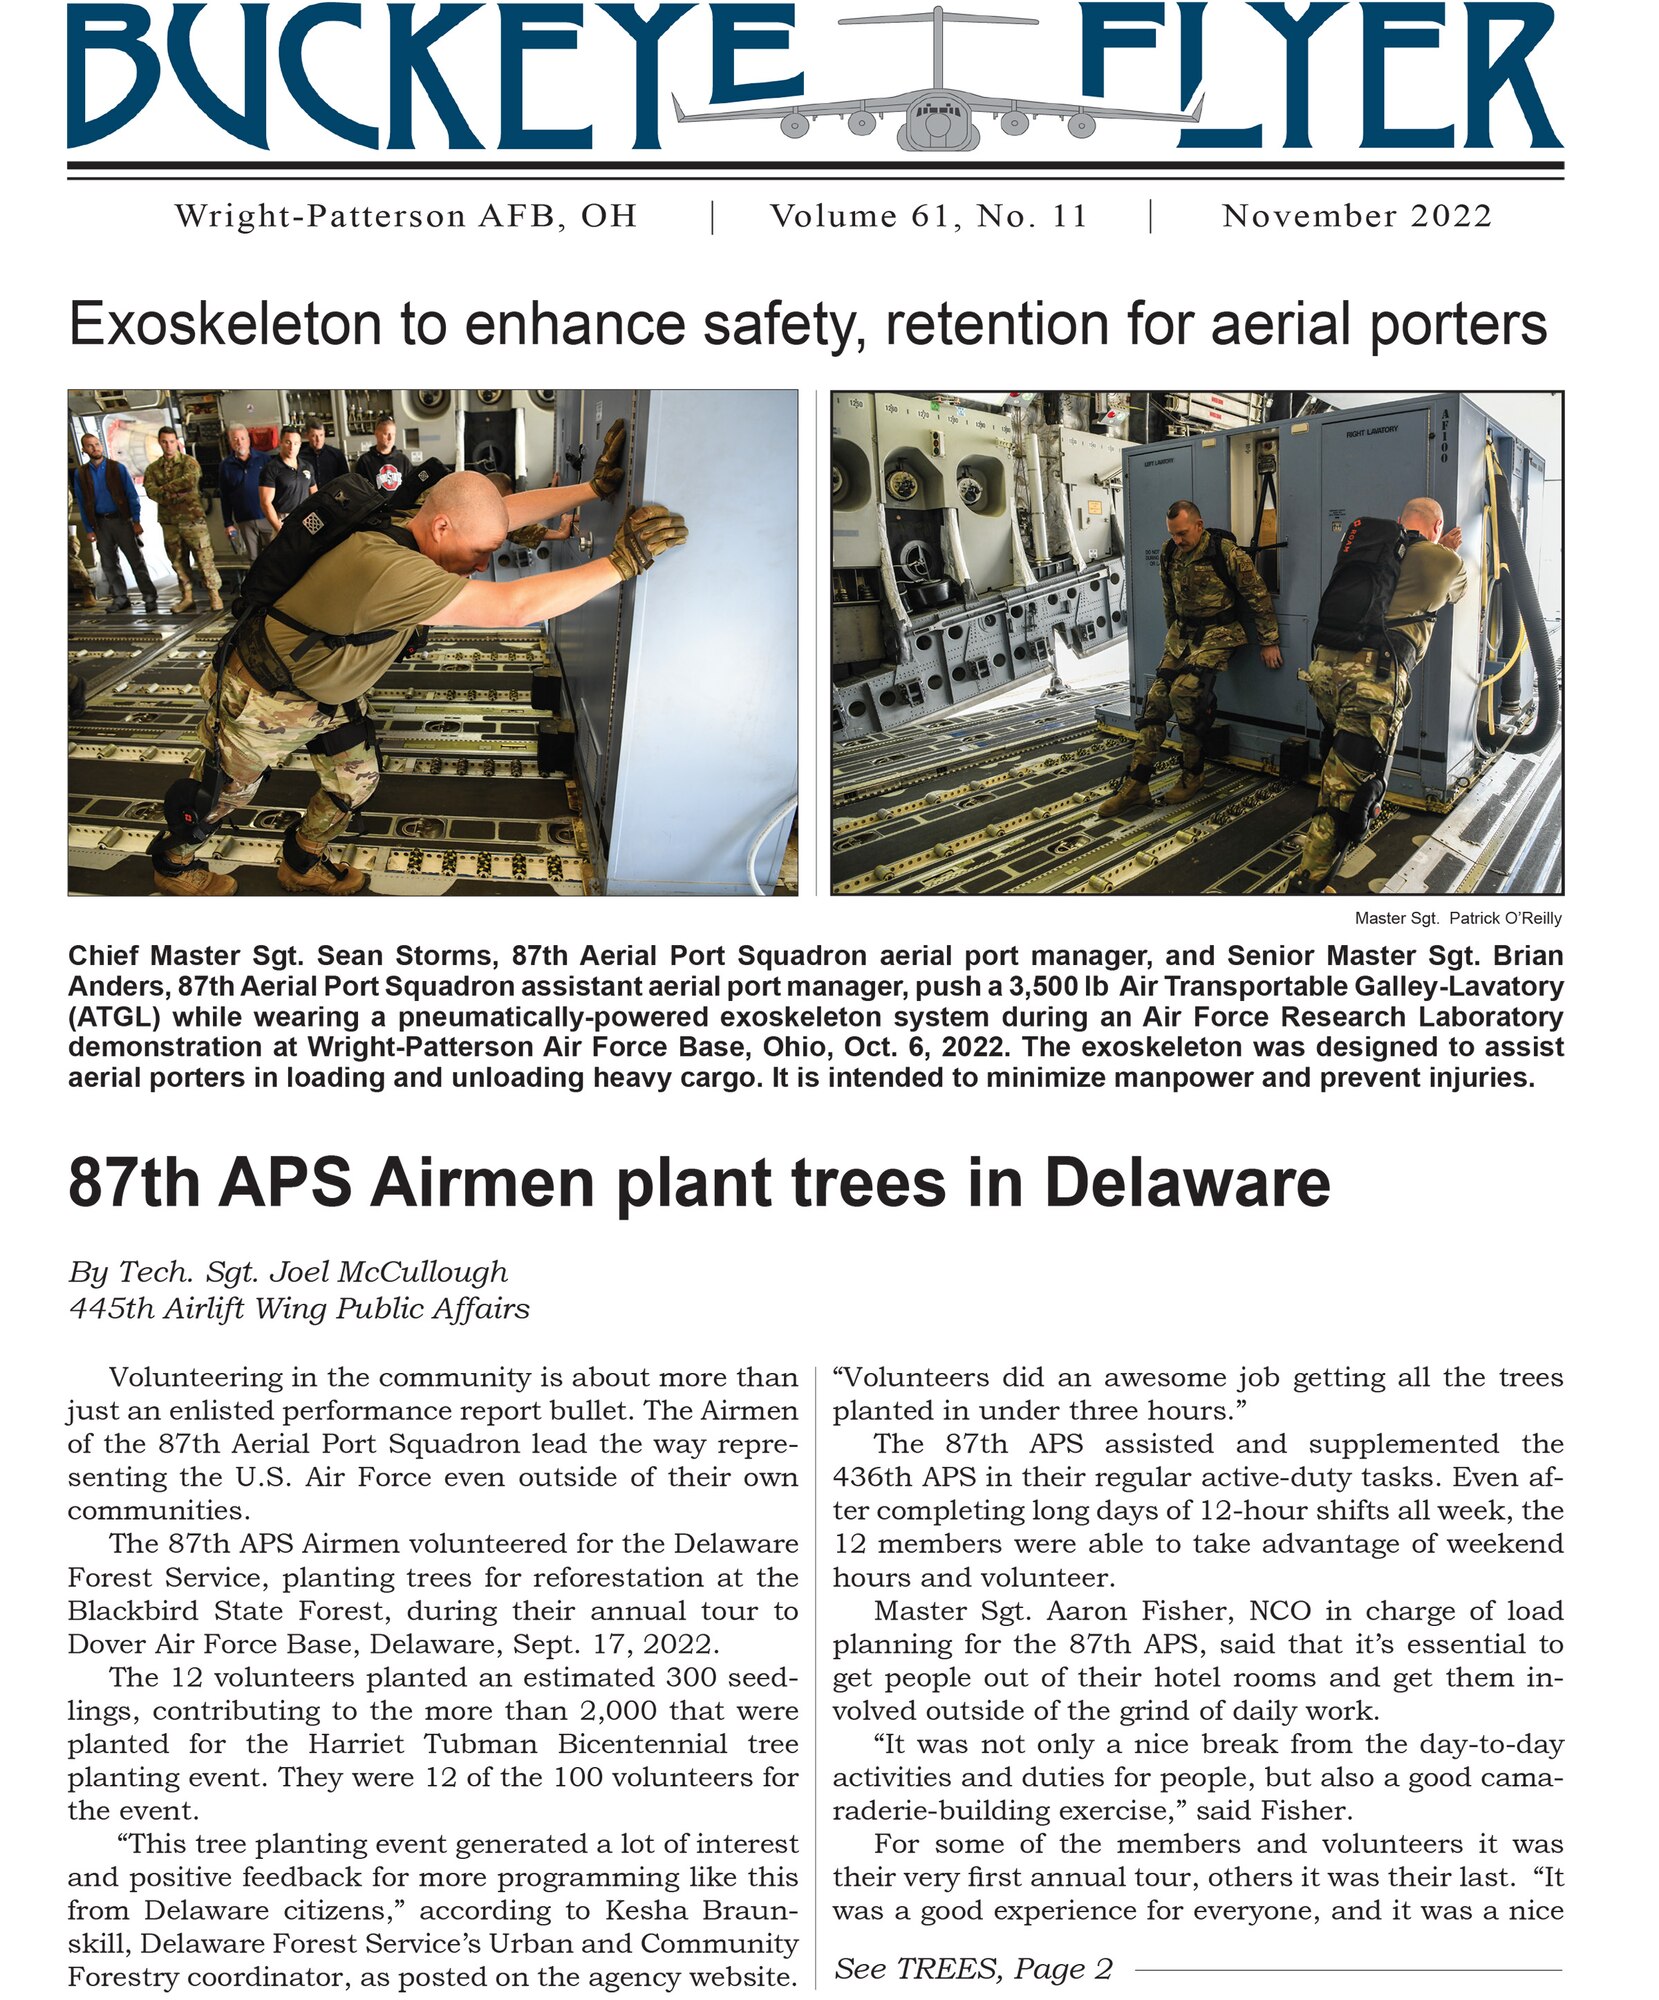 The November 2022 issue of the Buckeye Flyer is now available. The official publication of the 445th Airlift Wing includes eight pages of stories, photos and features pertaining to the 445th Airlift Wing, Air Force Reserve Command and the U.S. Air Force.